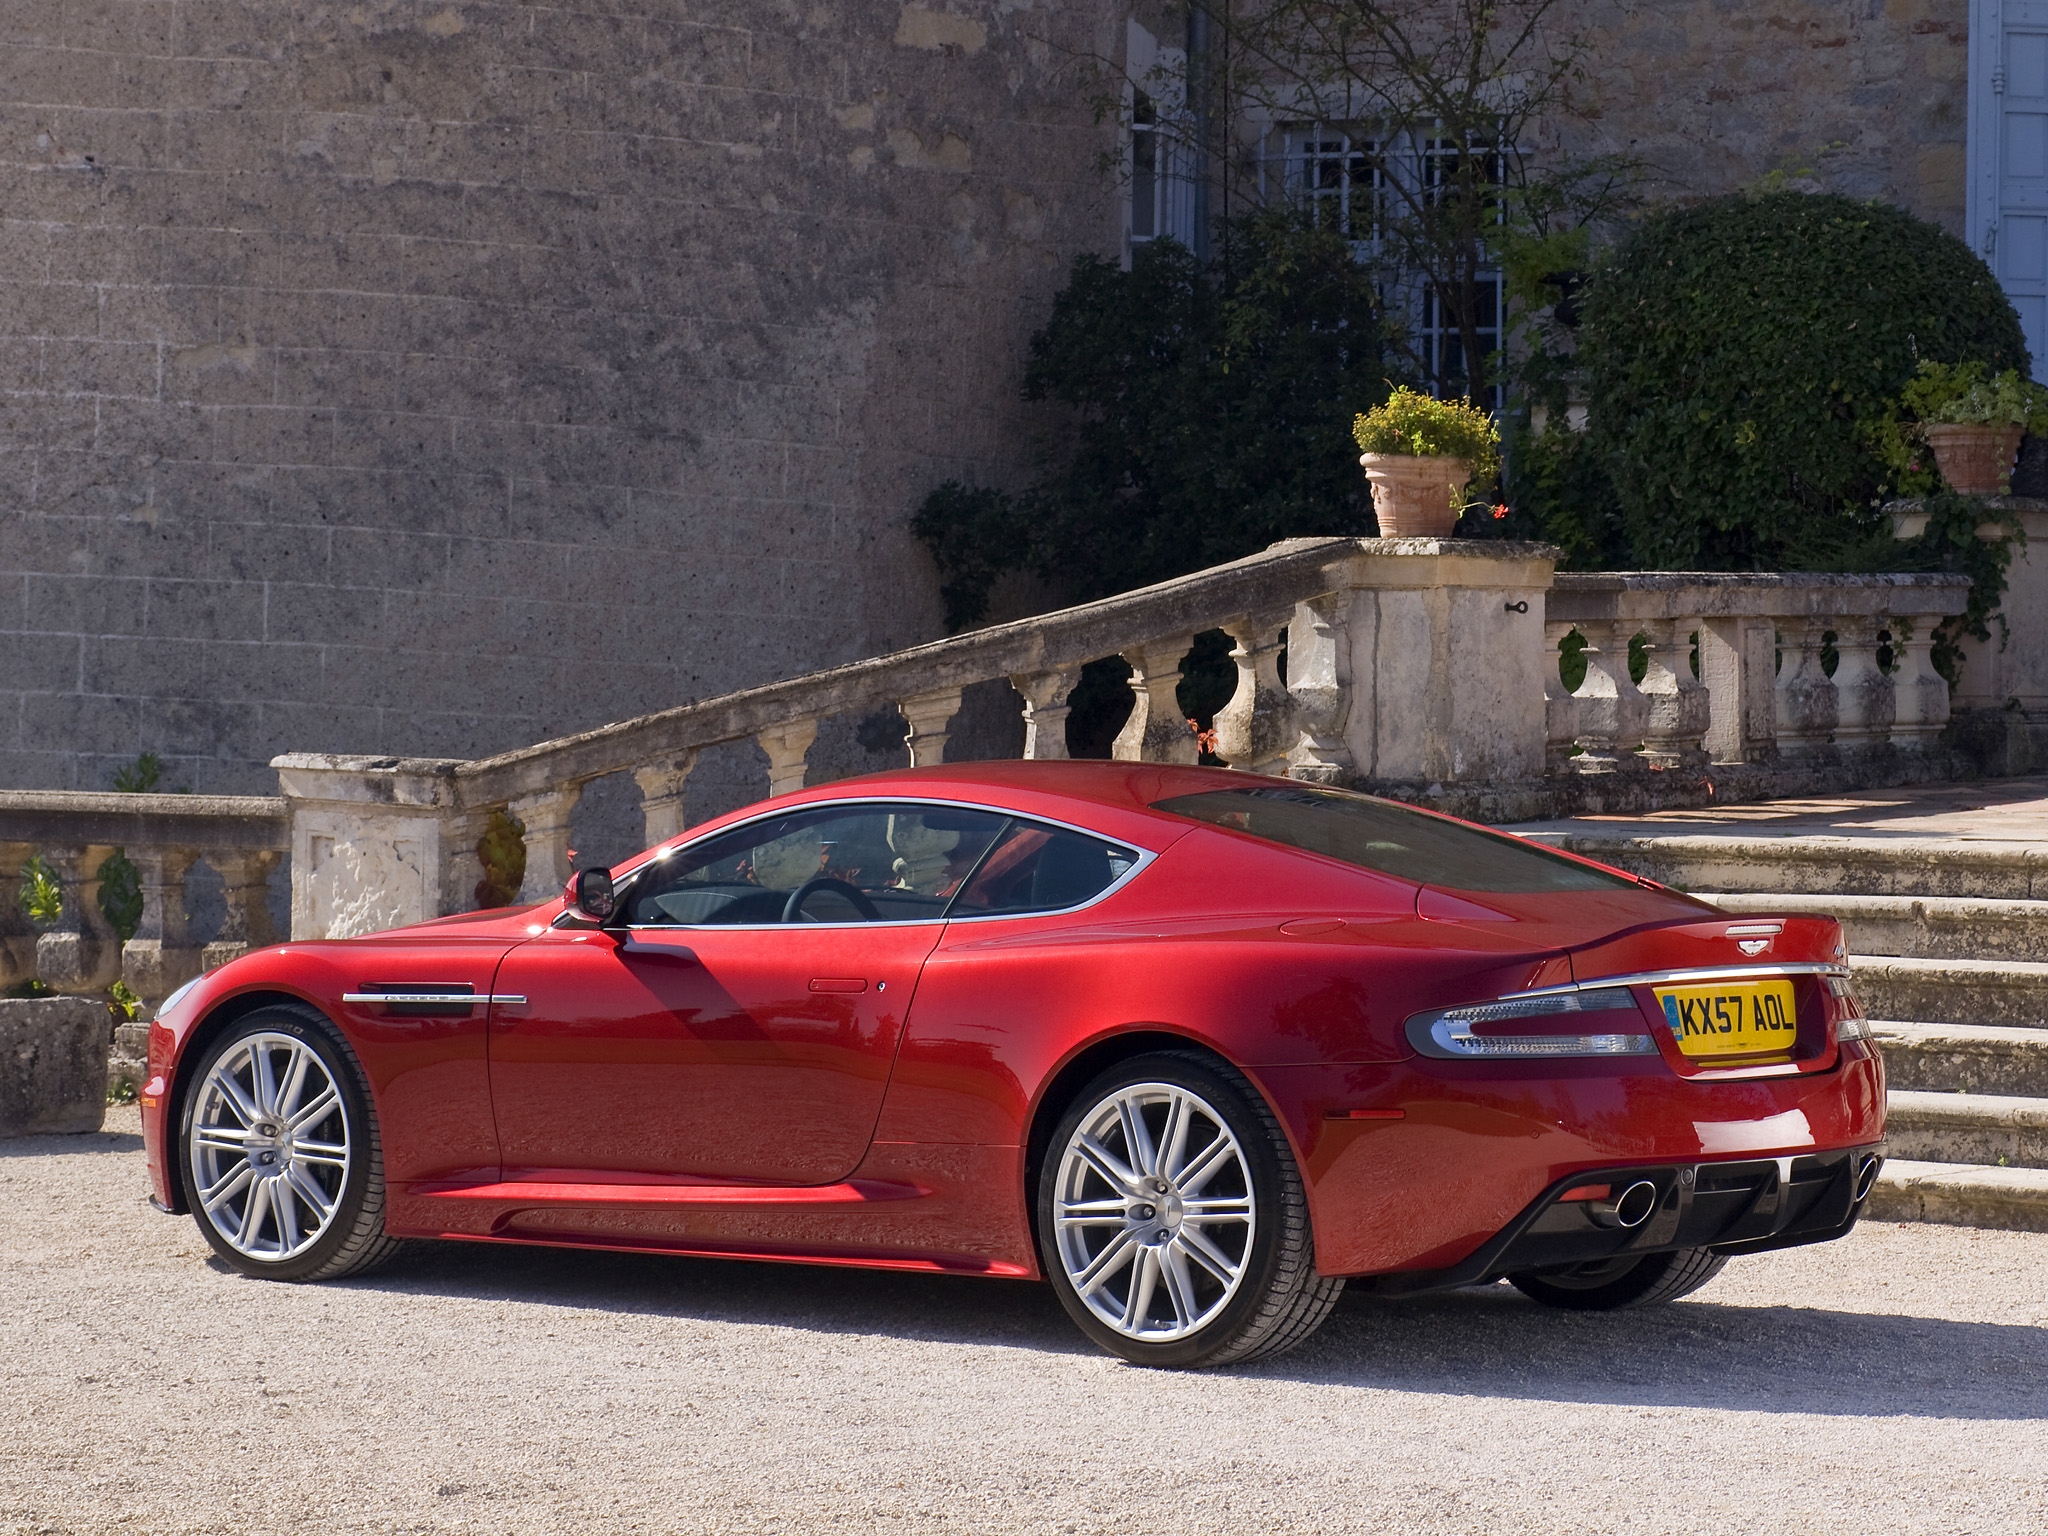 house, aston martin, cars, red, side view, style, dbs, 2008, shrubs